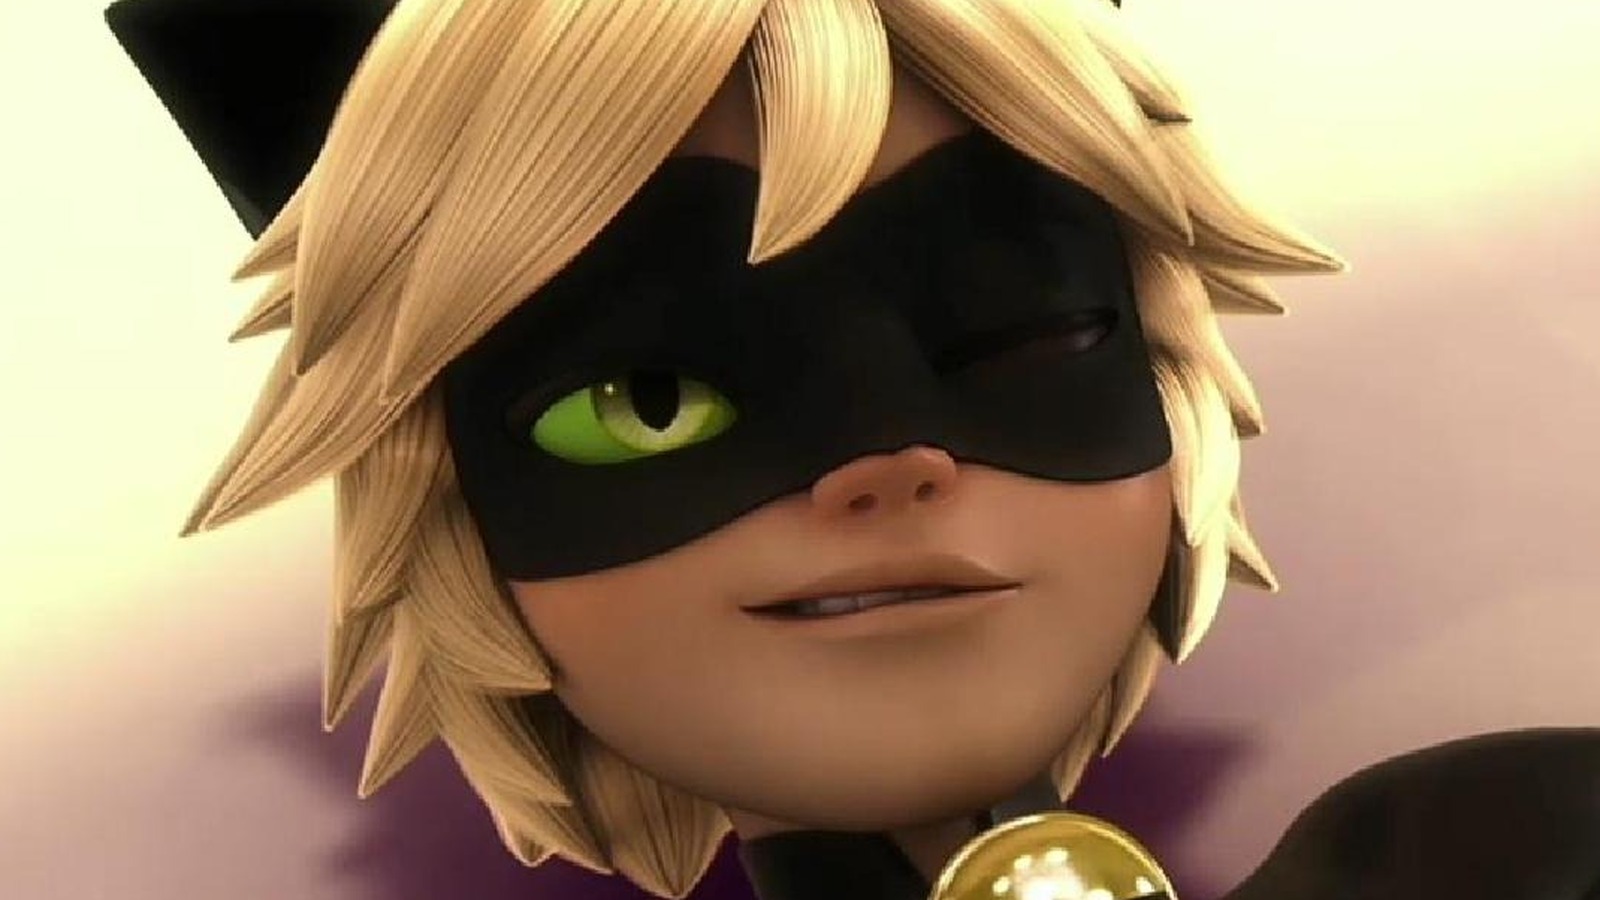 Why Cat Noir From Miraculous Ladybug Sounds So Familiar